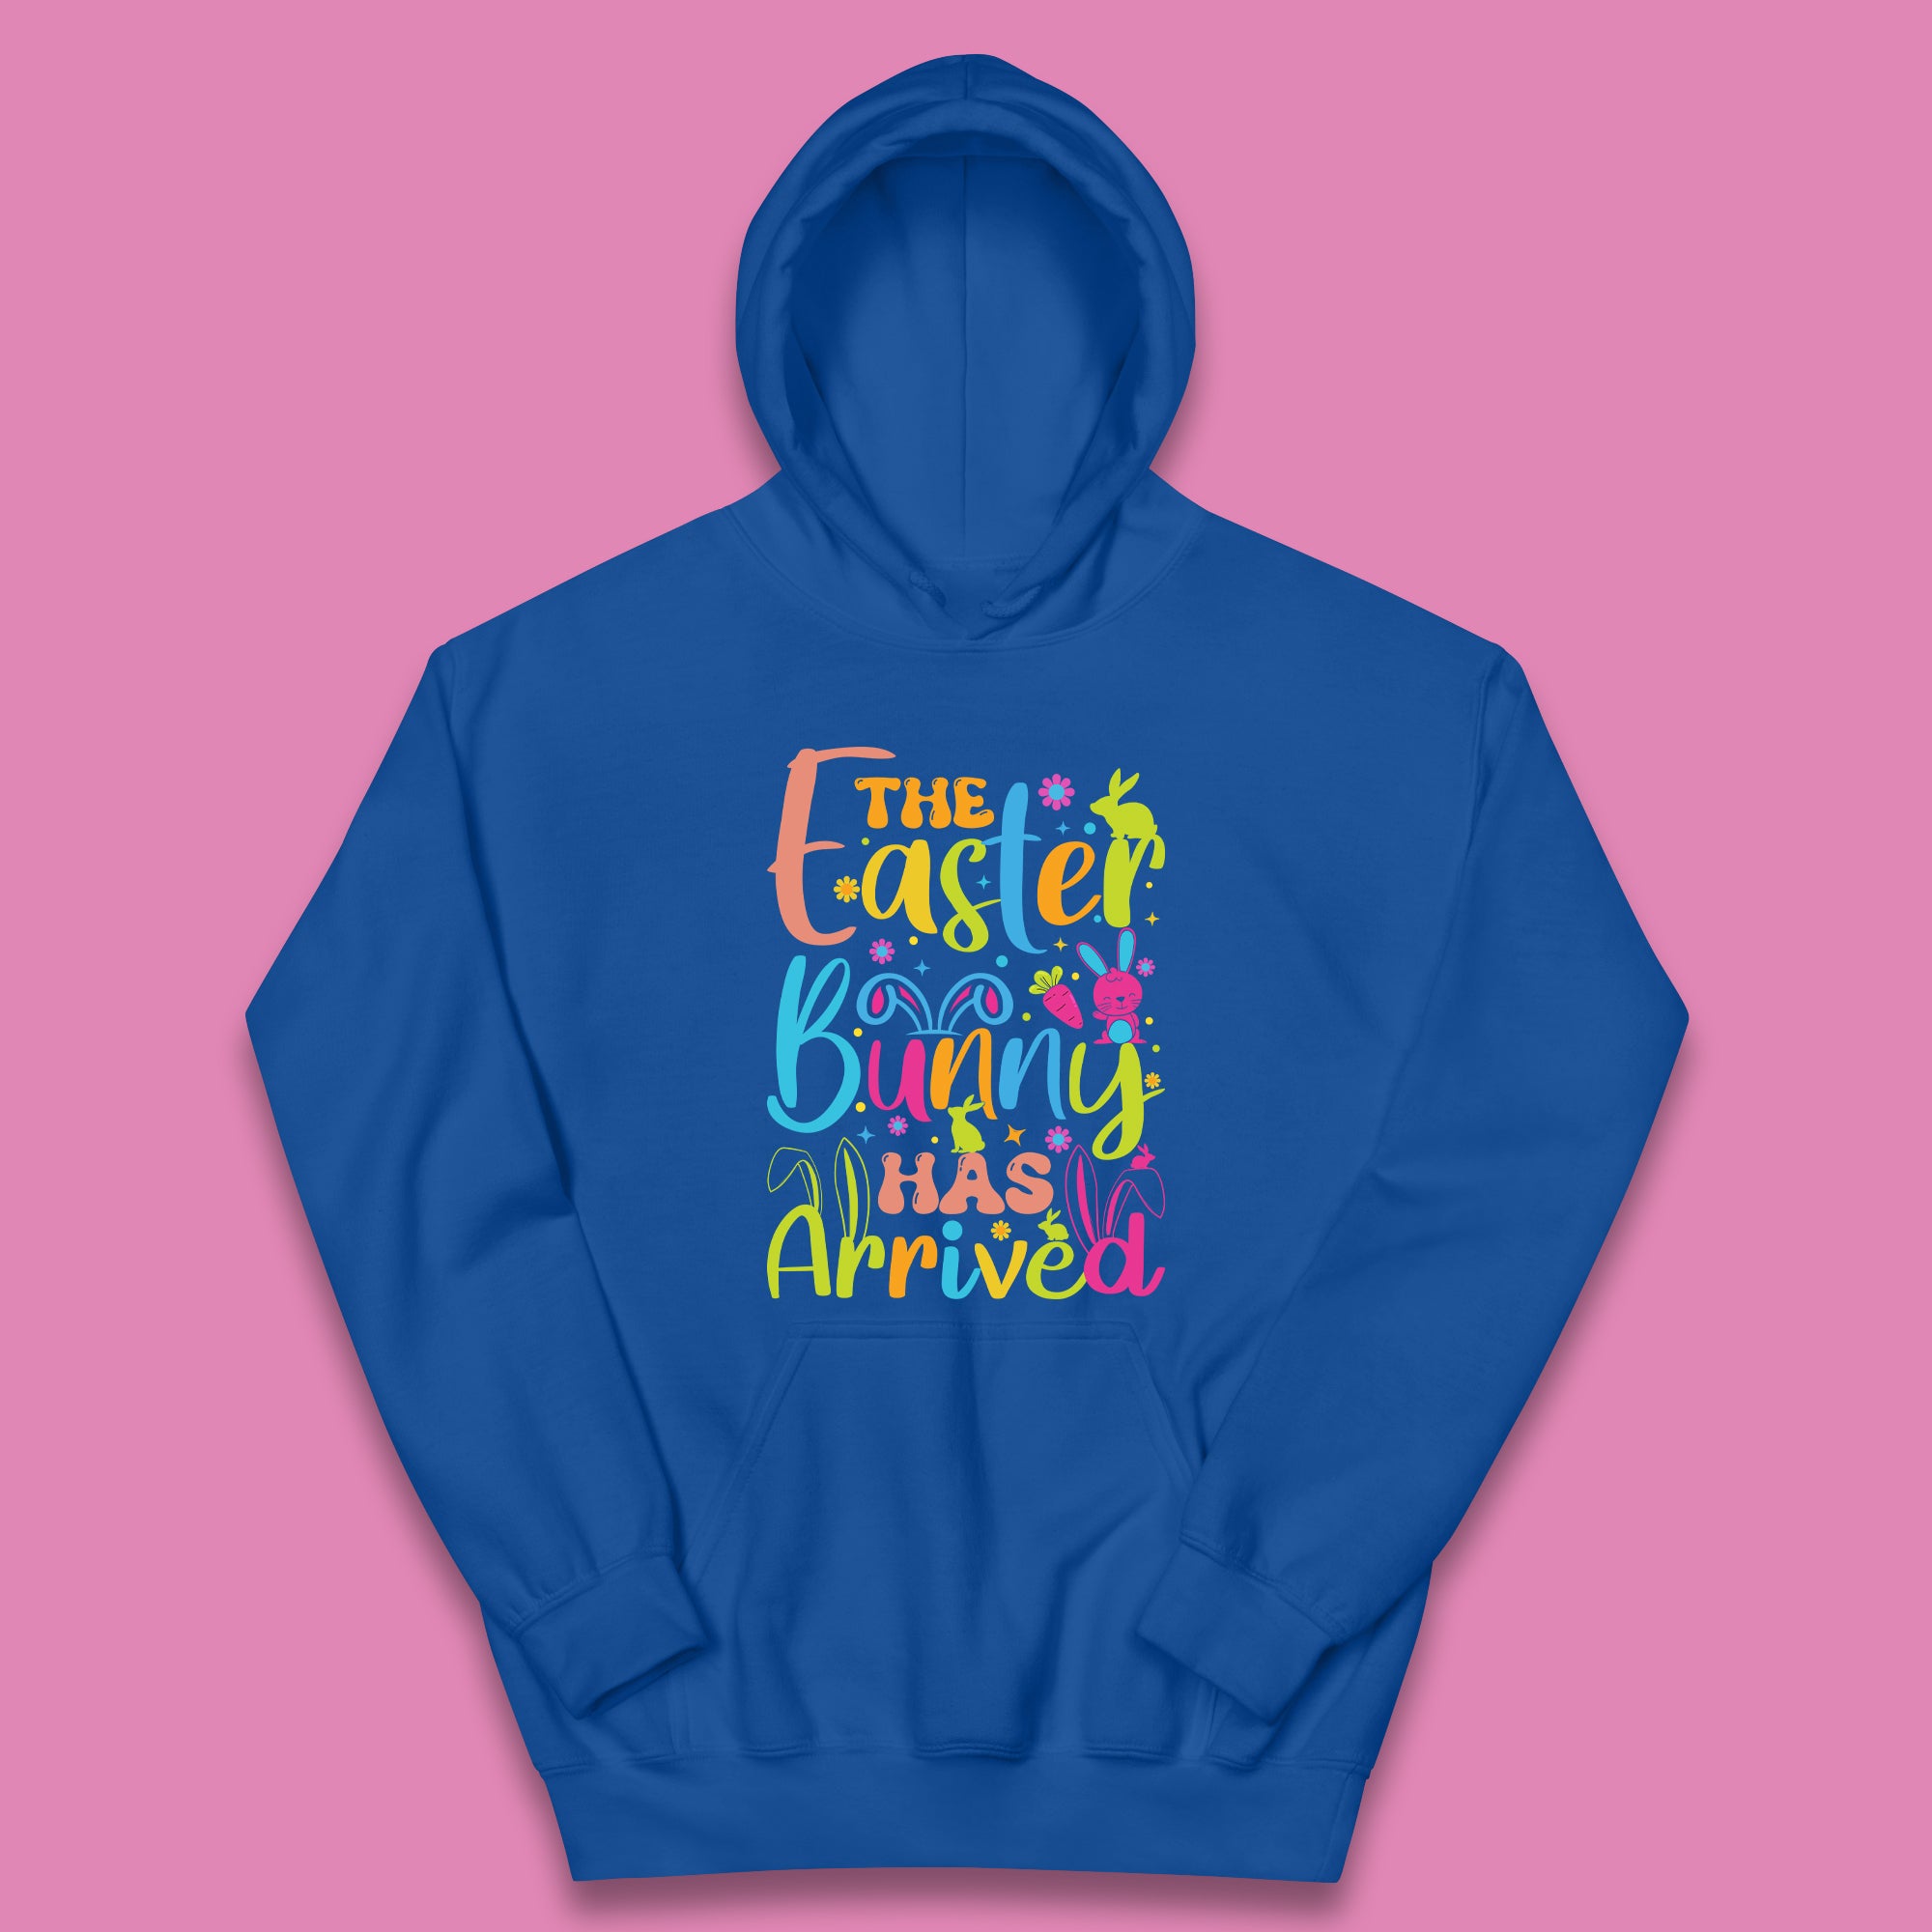 The Easter Bunny Has Arrived Kids Hoodie